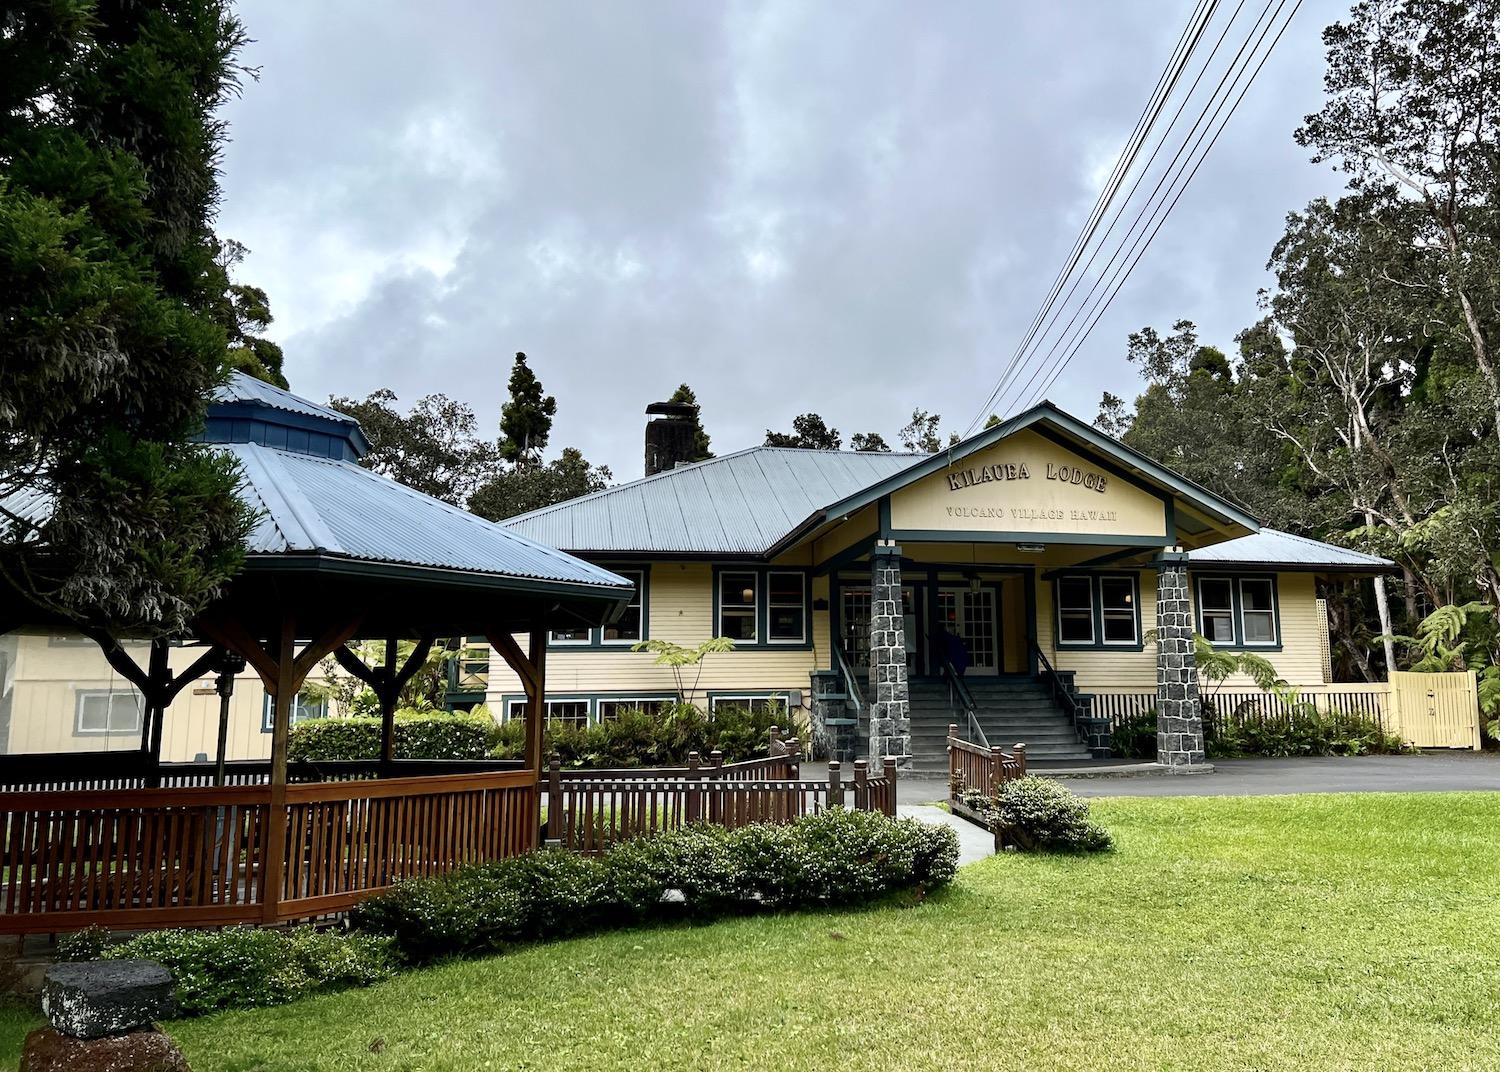 Kīlauea Lodge and Restaurant has a series of buildings on a quiet property in Volcano just outside Hawai'i Volcanoes National Park.